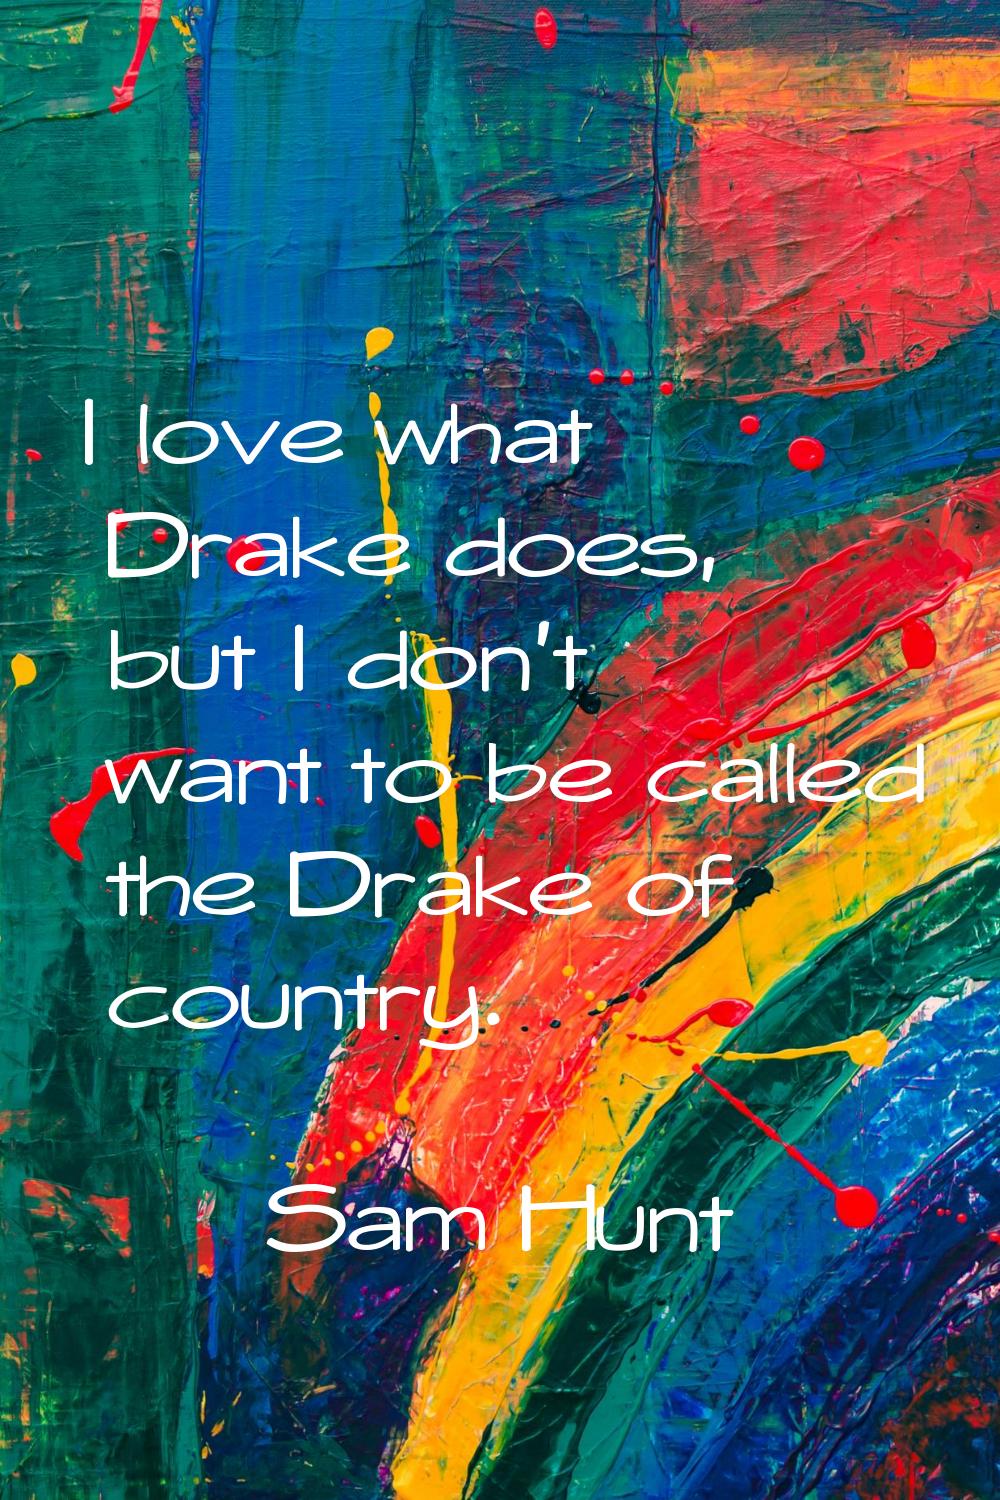 I love what Drake does, but I don't want to be called the Drake of country.